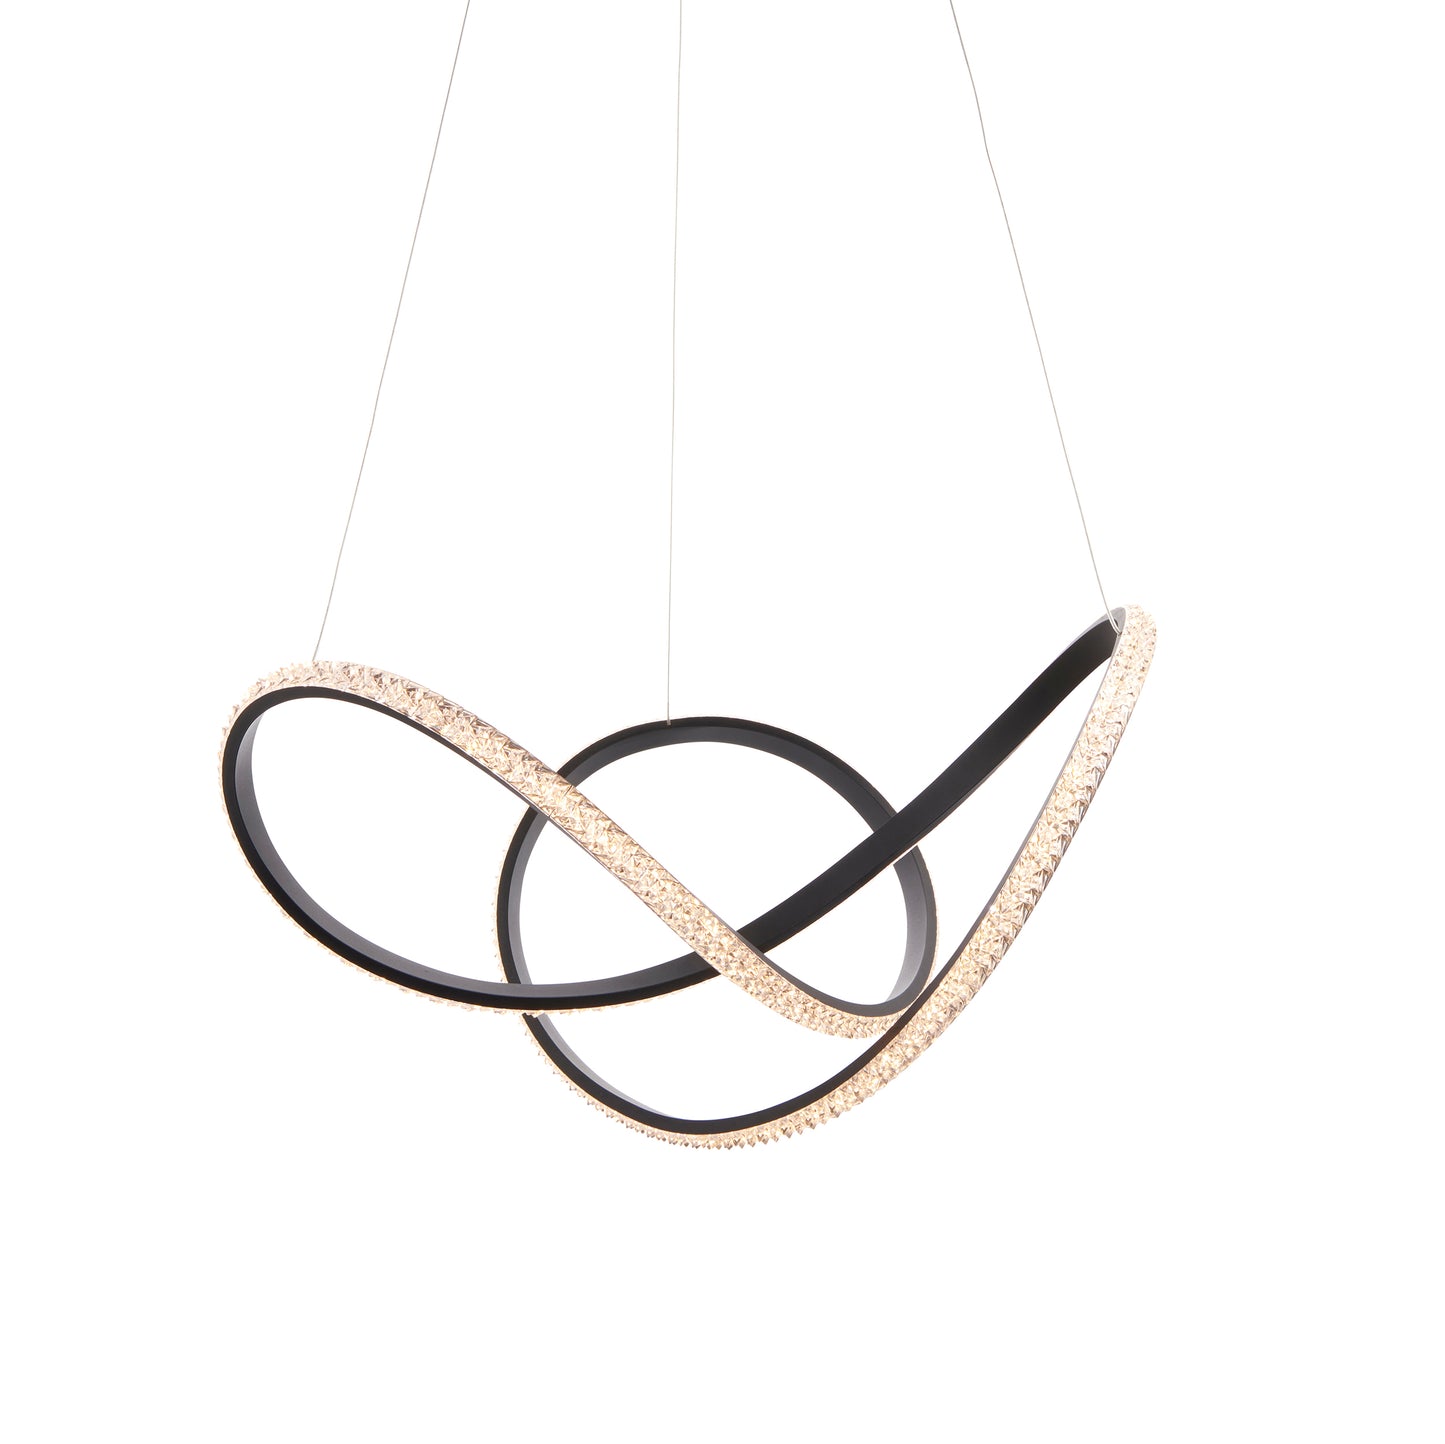 Swoop Contemporary Neon Faceted Pendant